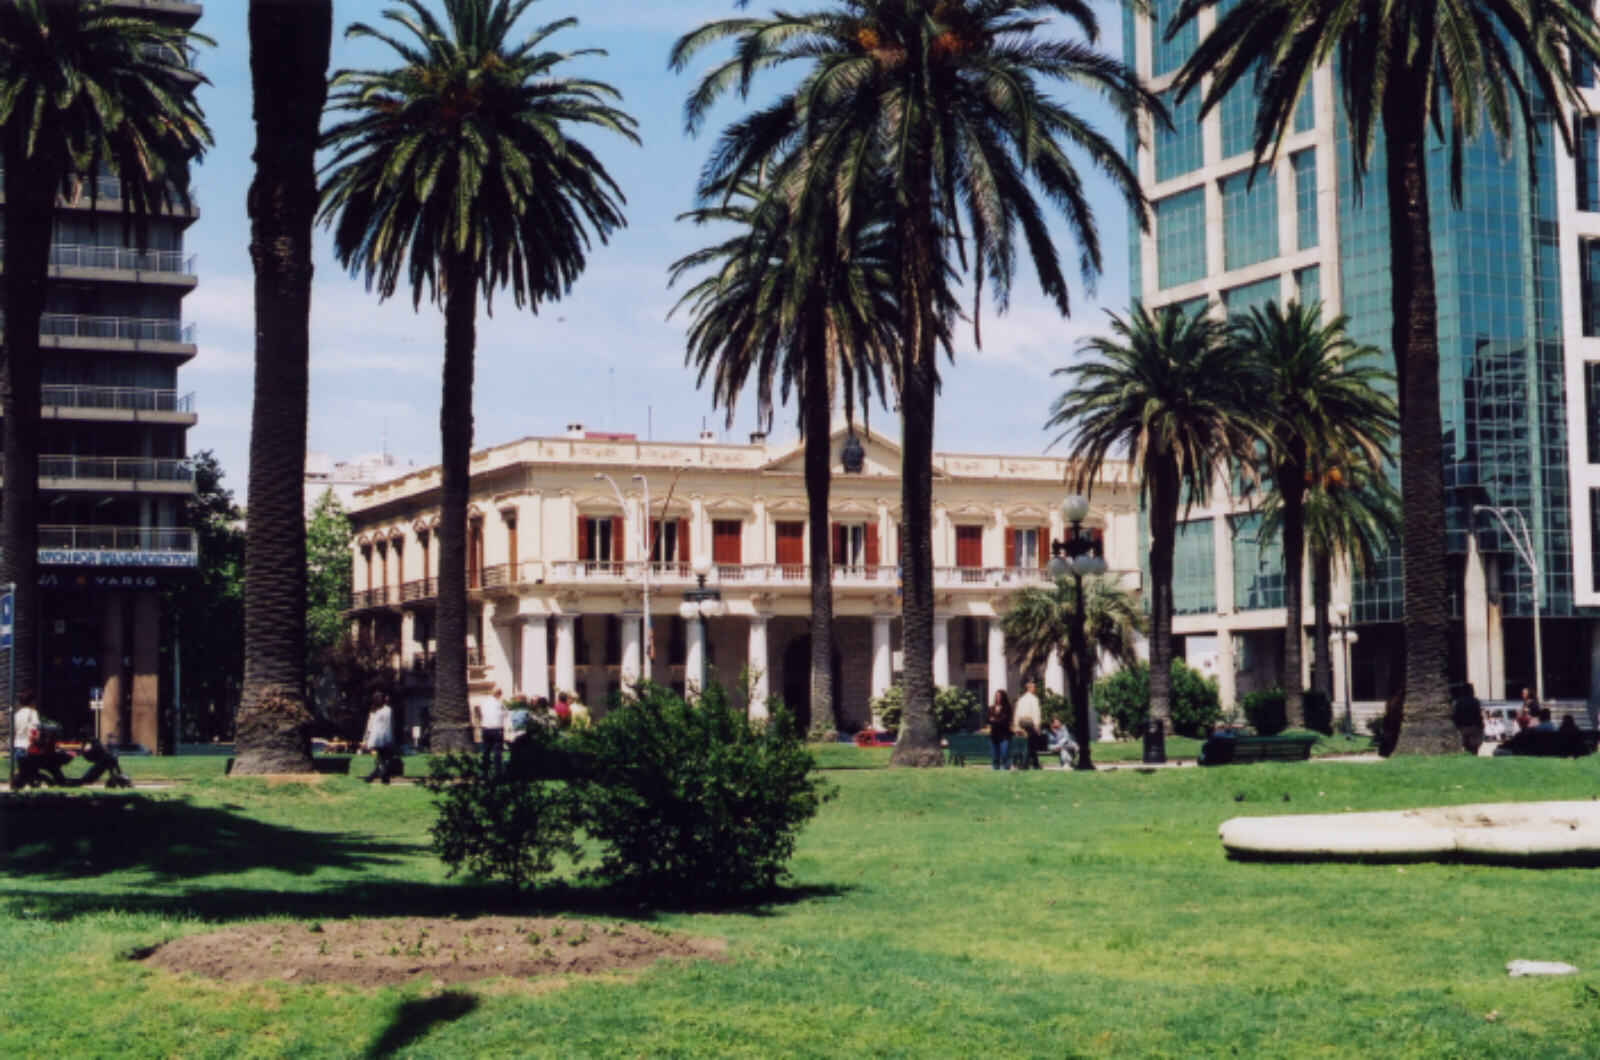 Government House in Plaza Independencia, Montevideo